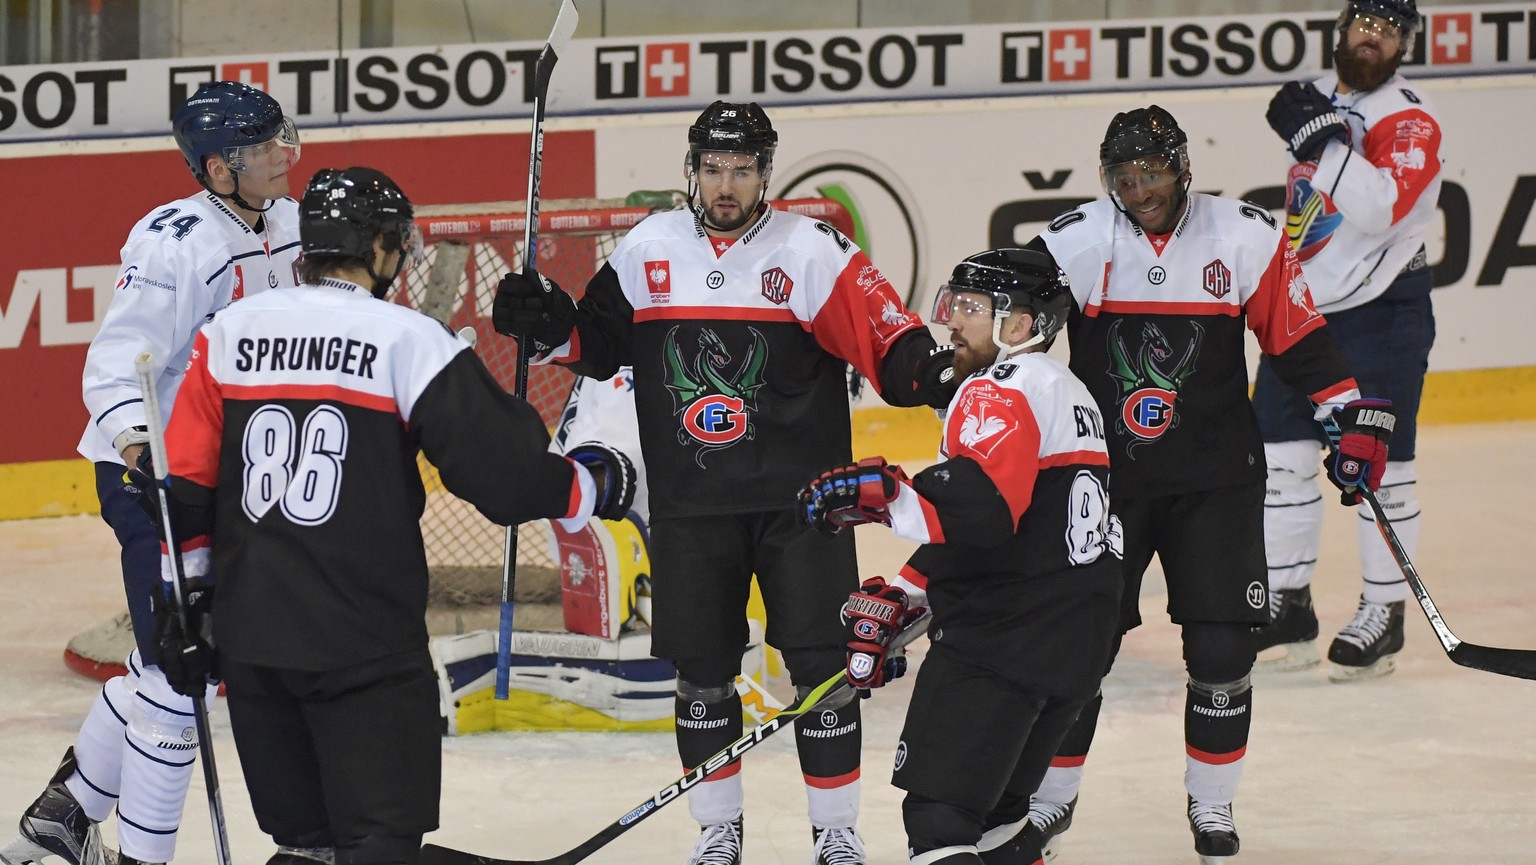 Fribourg's Greg Mauldin, Andrey Bykov, Michal Birner and Julien Sprunger, from right, celebrate their third Goal during the ice hockey Champions League match 1/4 Final between HC Fribourg-Gotteron and ...